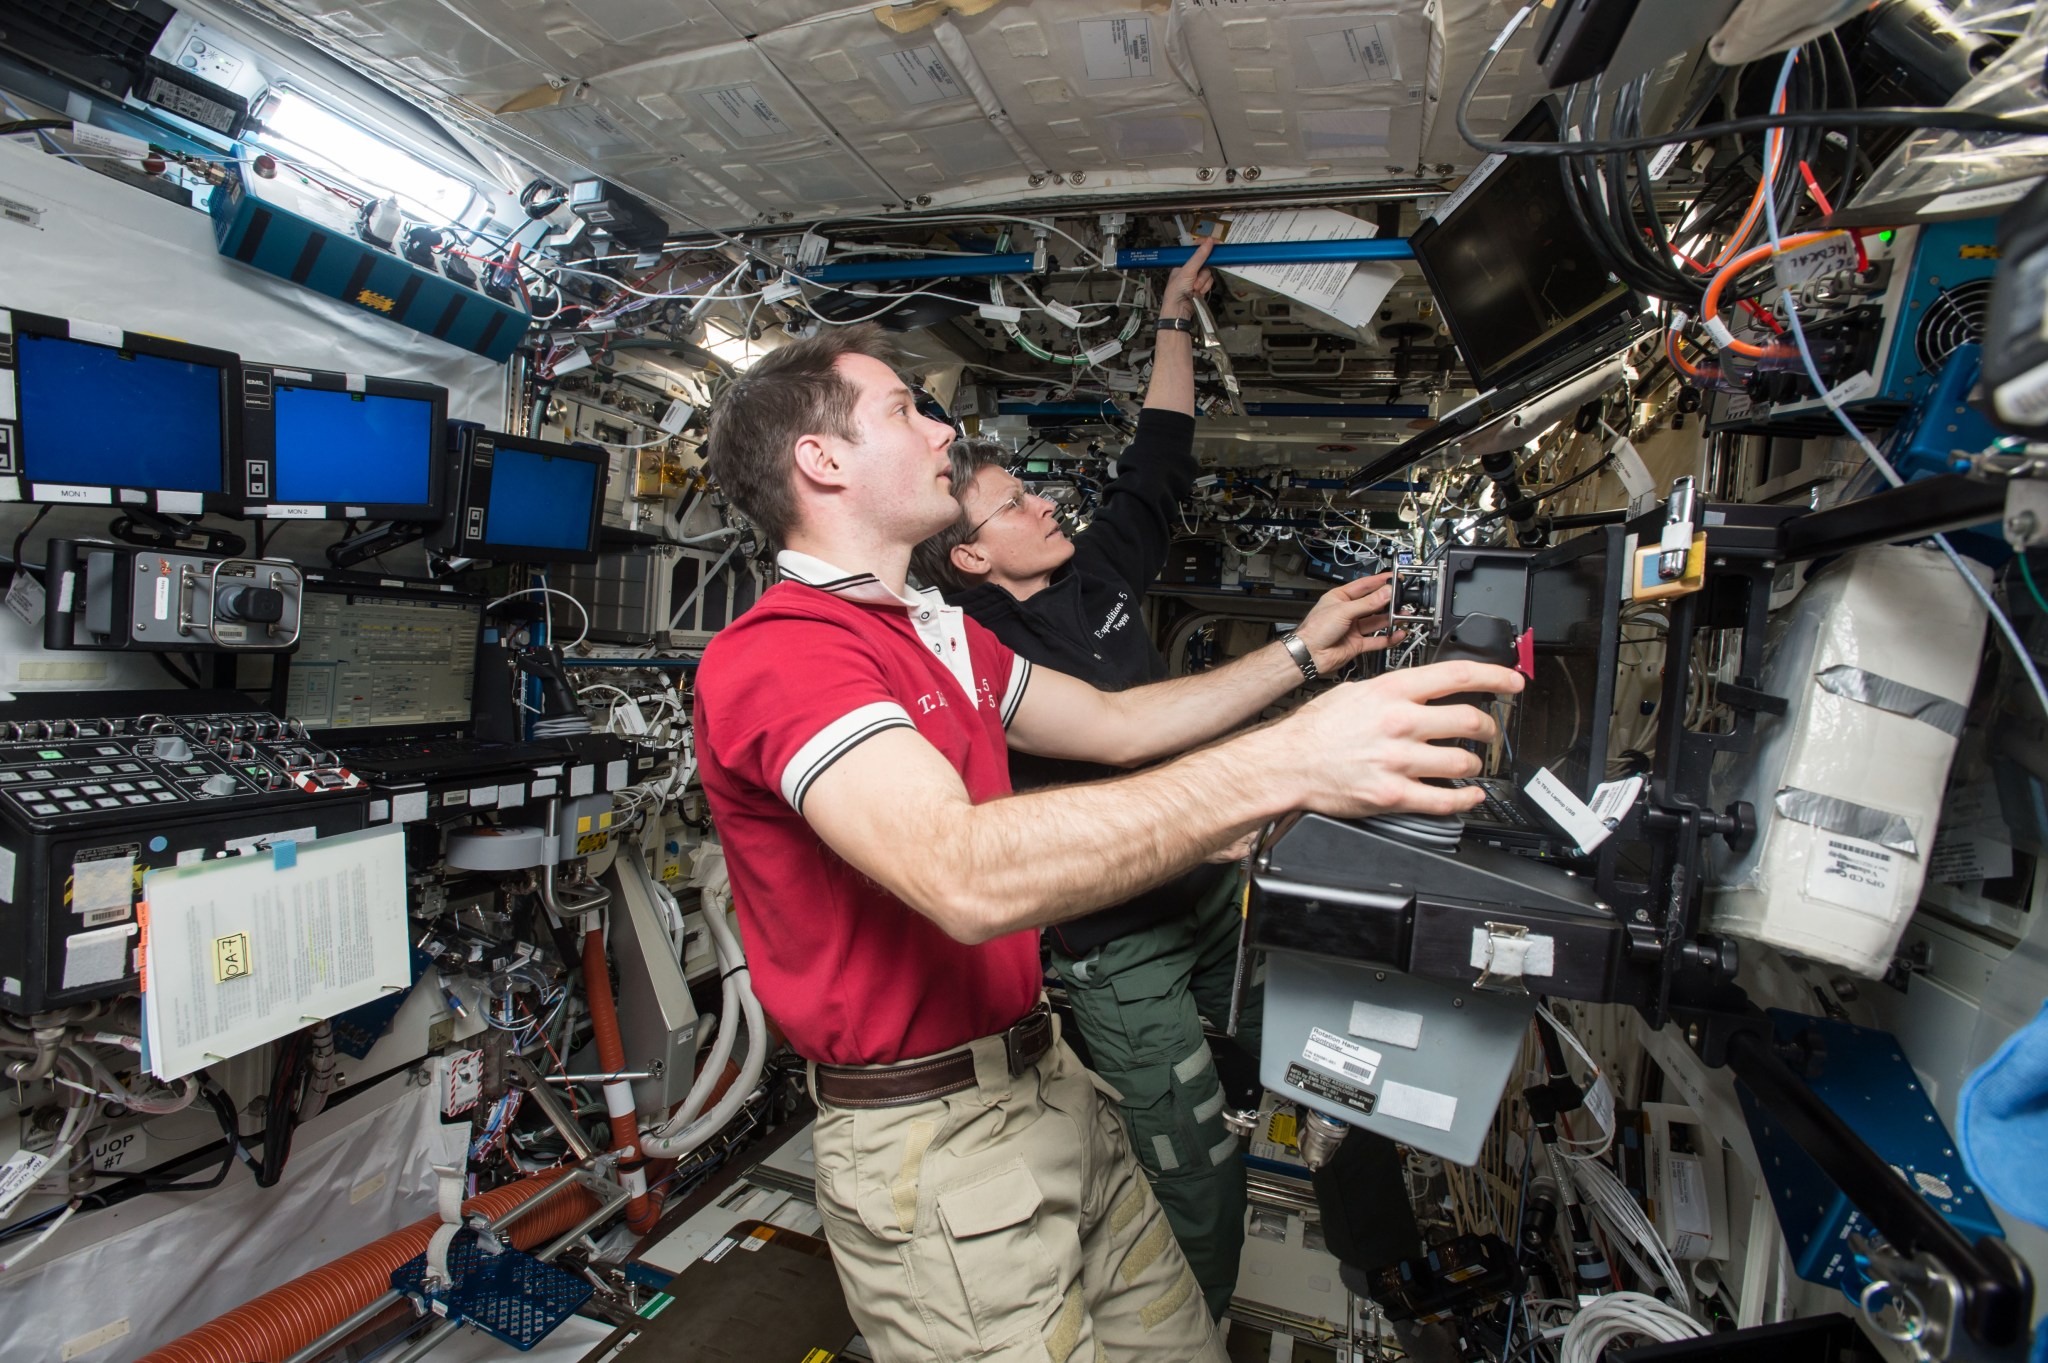 Astronaut Thomas Pesquet completes the Robotic On-Board Trainer